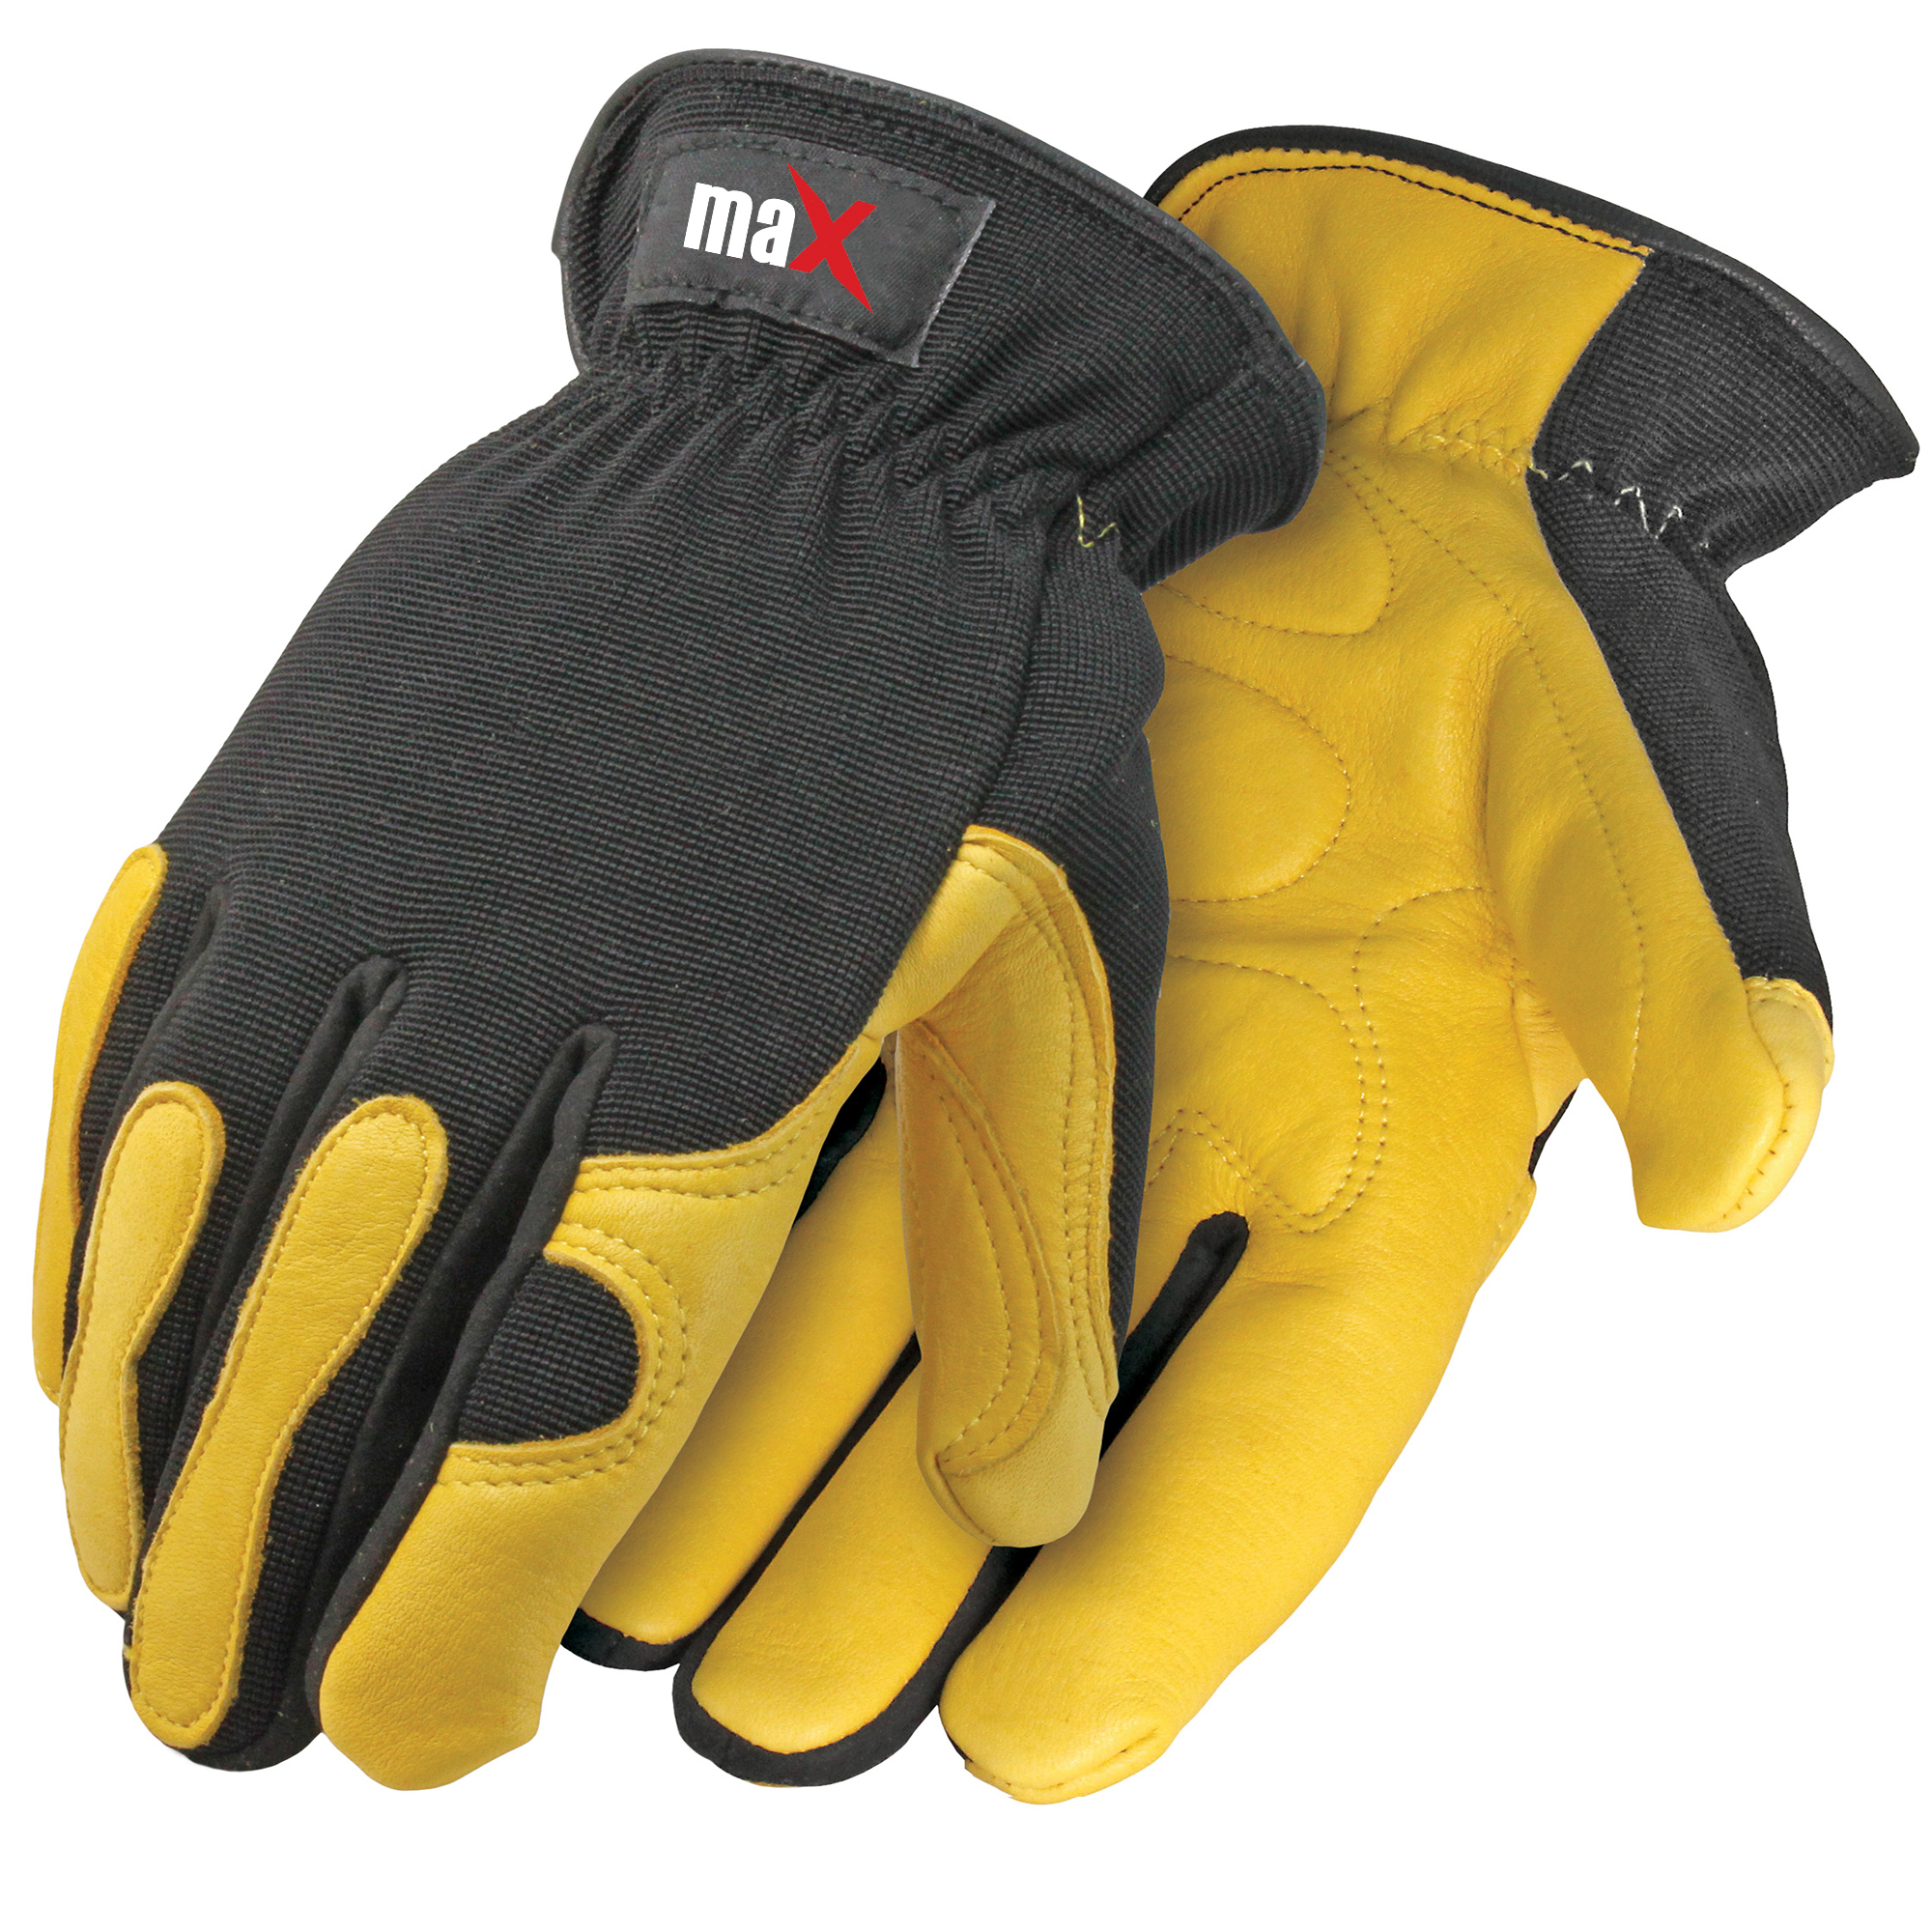 maX&trade; Comfort Slip-on Gloves with Padded Palms